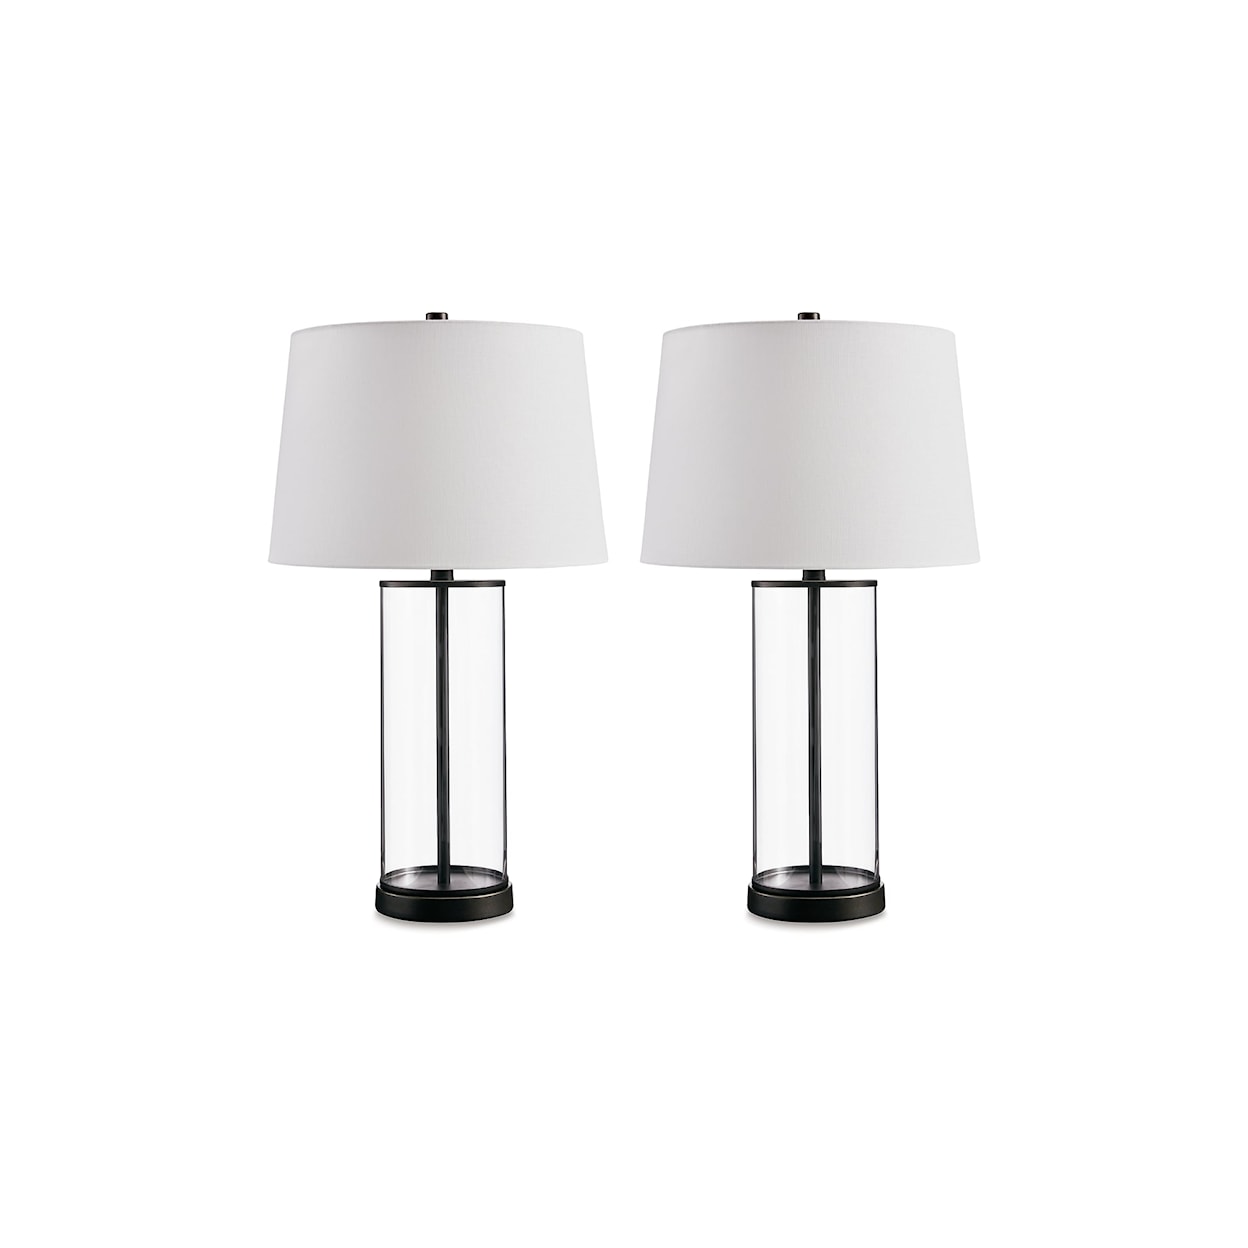 Signature Design by Ashley Wilmburgh Glass Table Lamp (Set of 2)